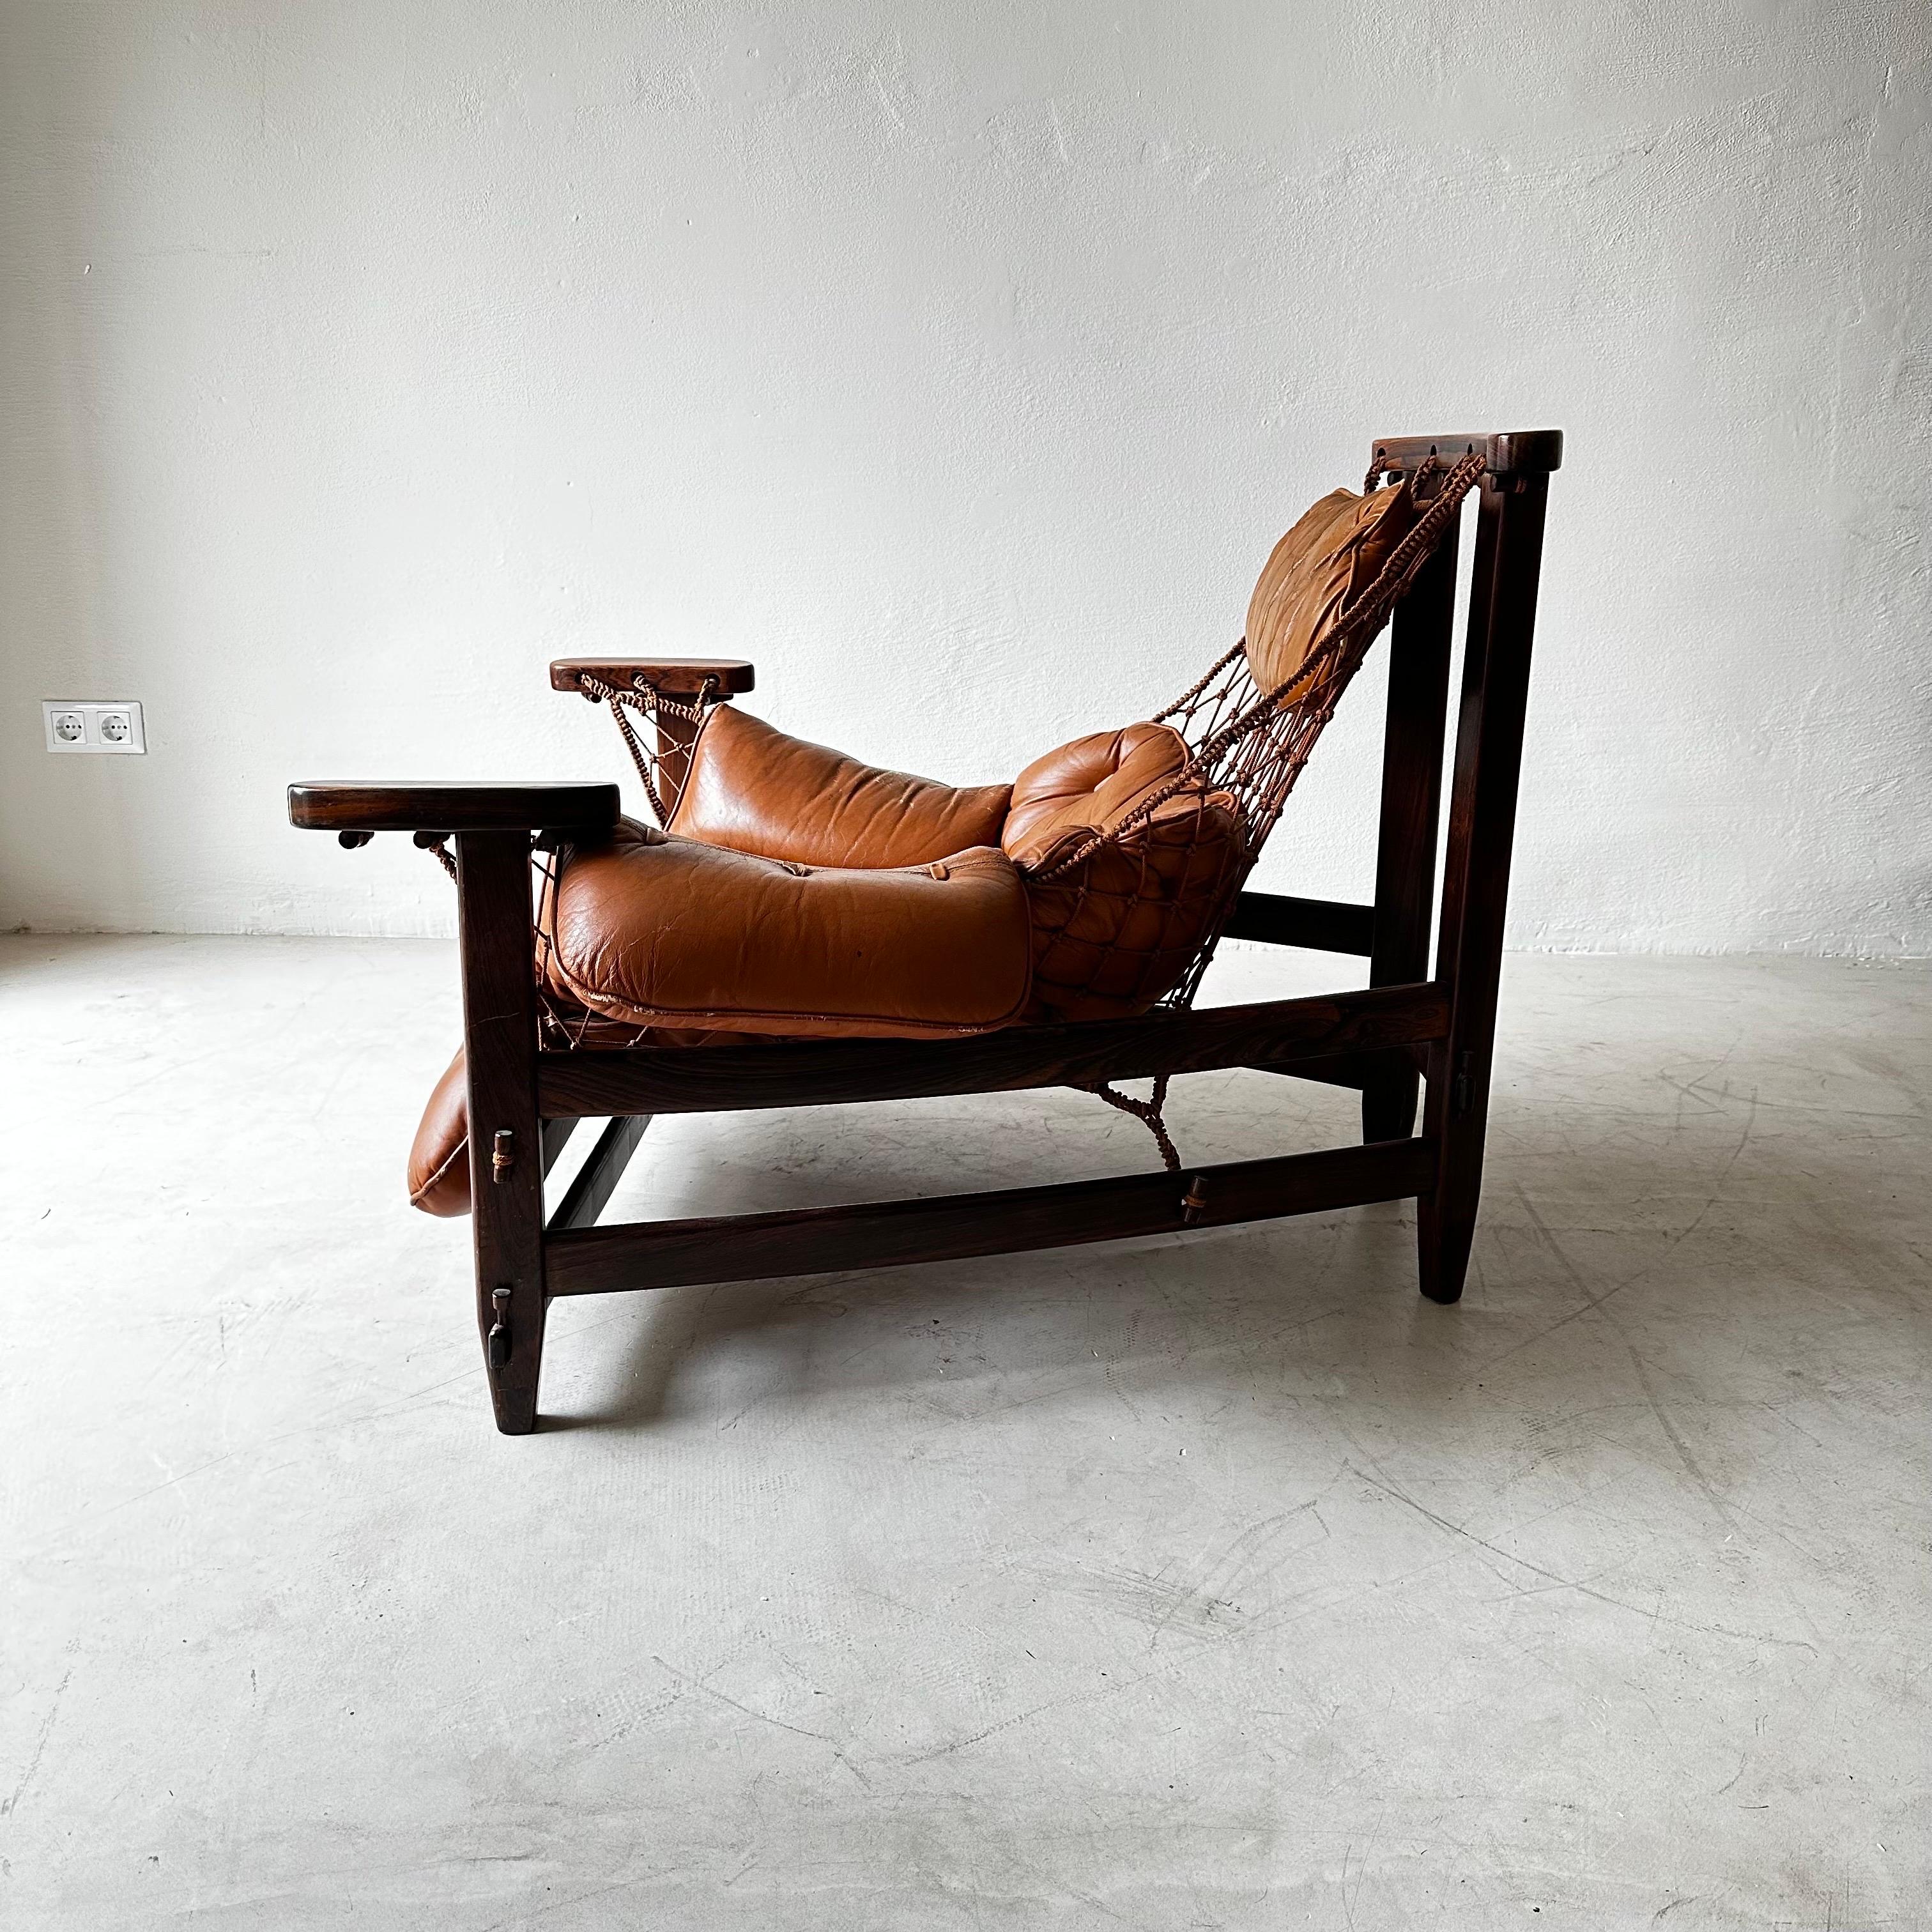 Mid-Century Modern Jangada Chair in Patinated Cognac Leather by Wood Art Signed, Brazil, 1960s